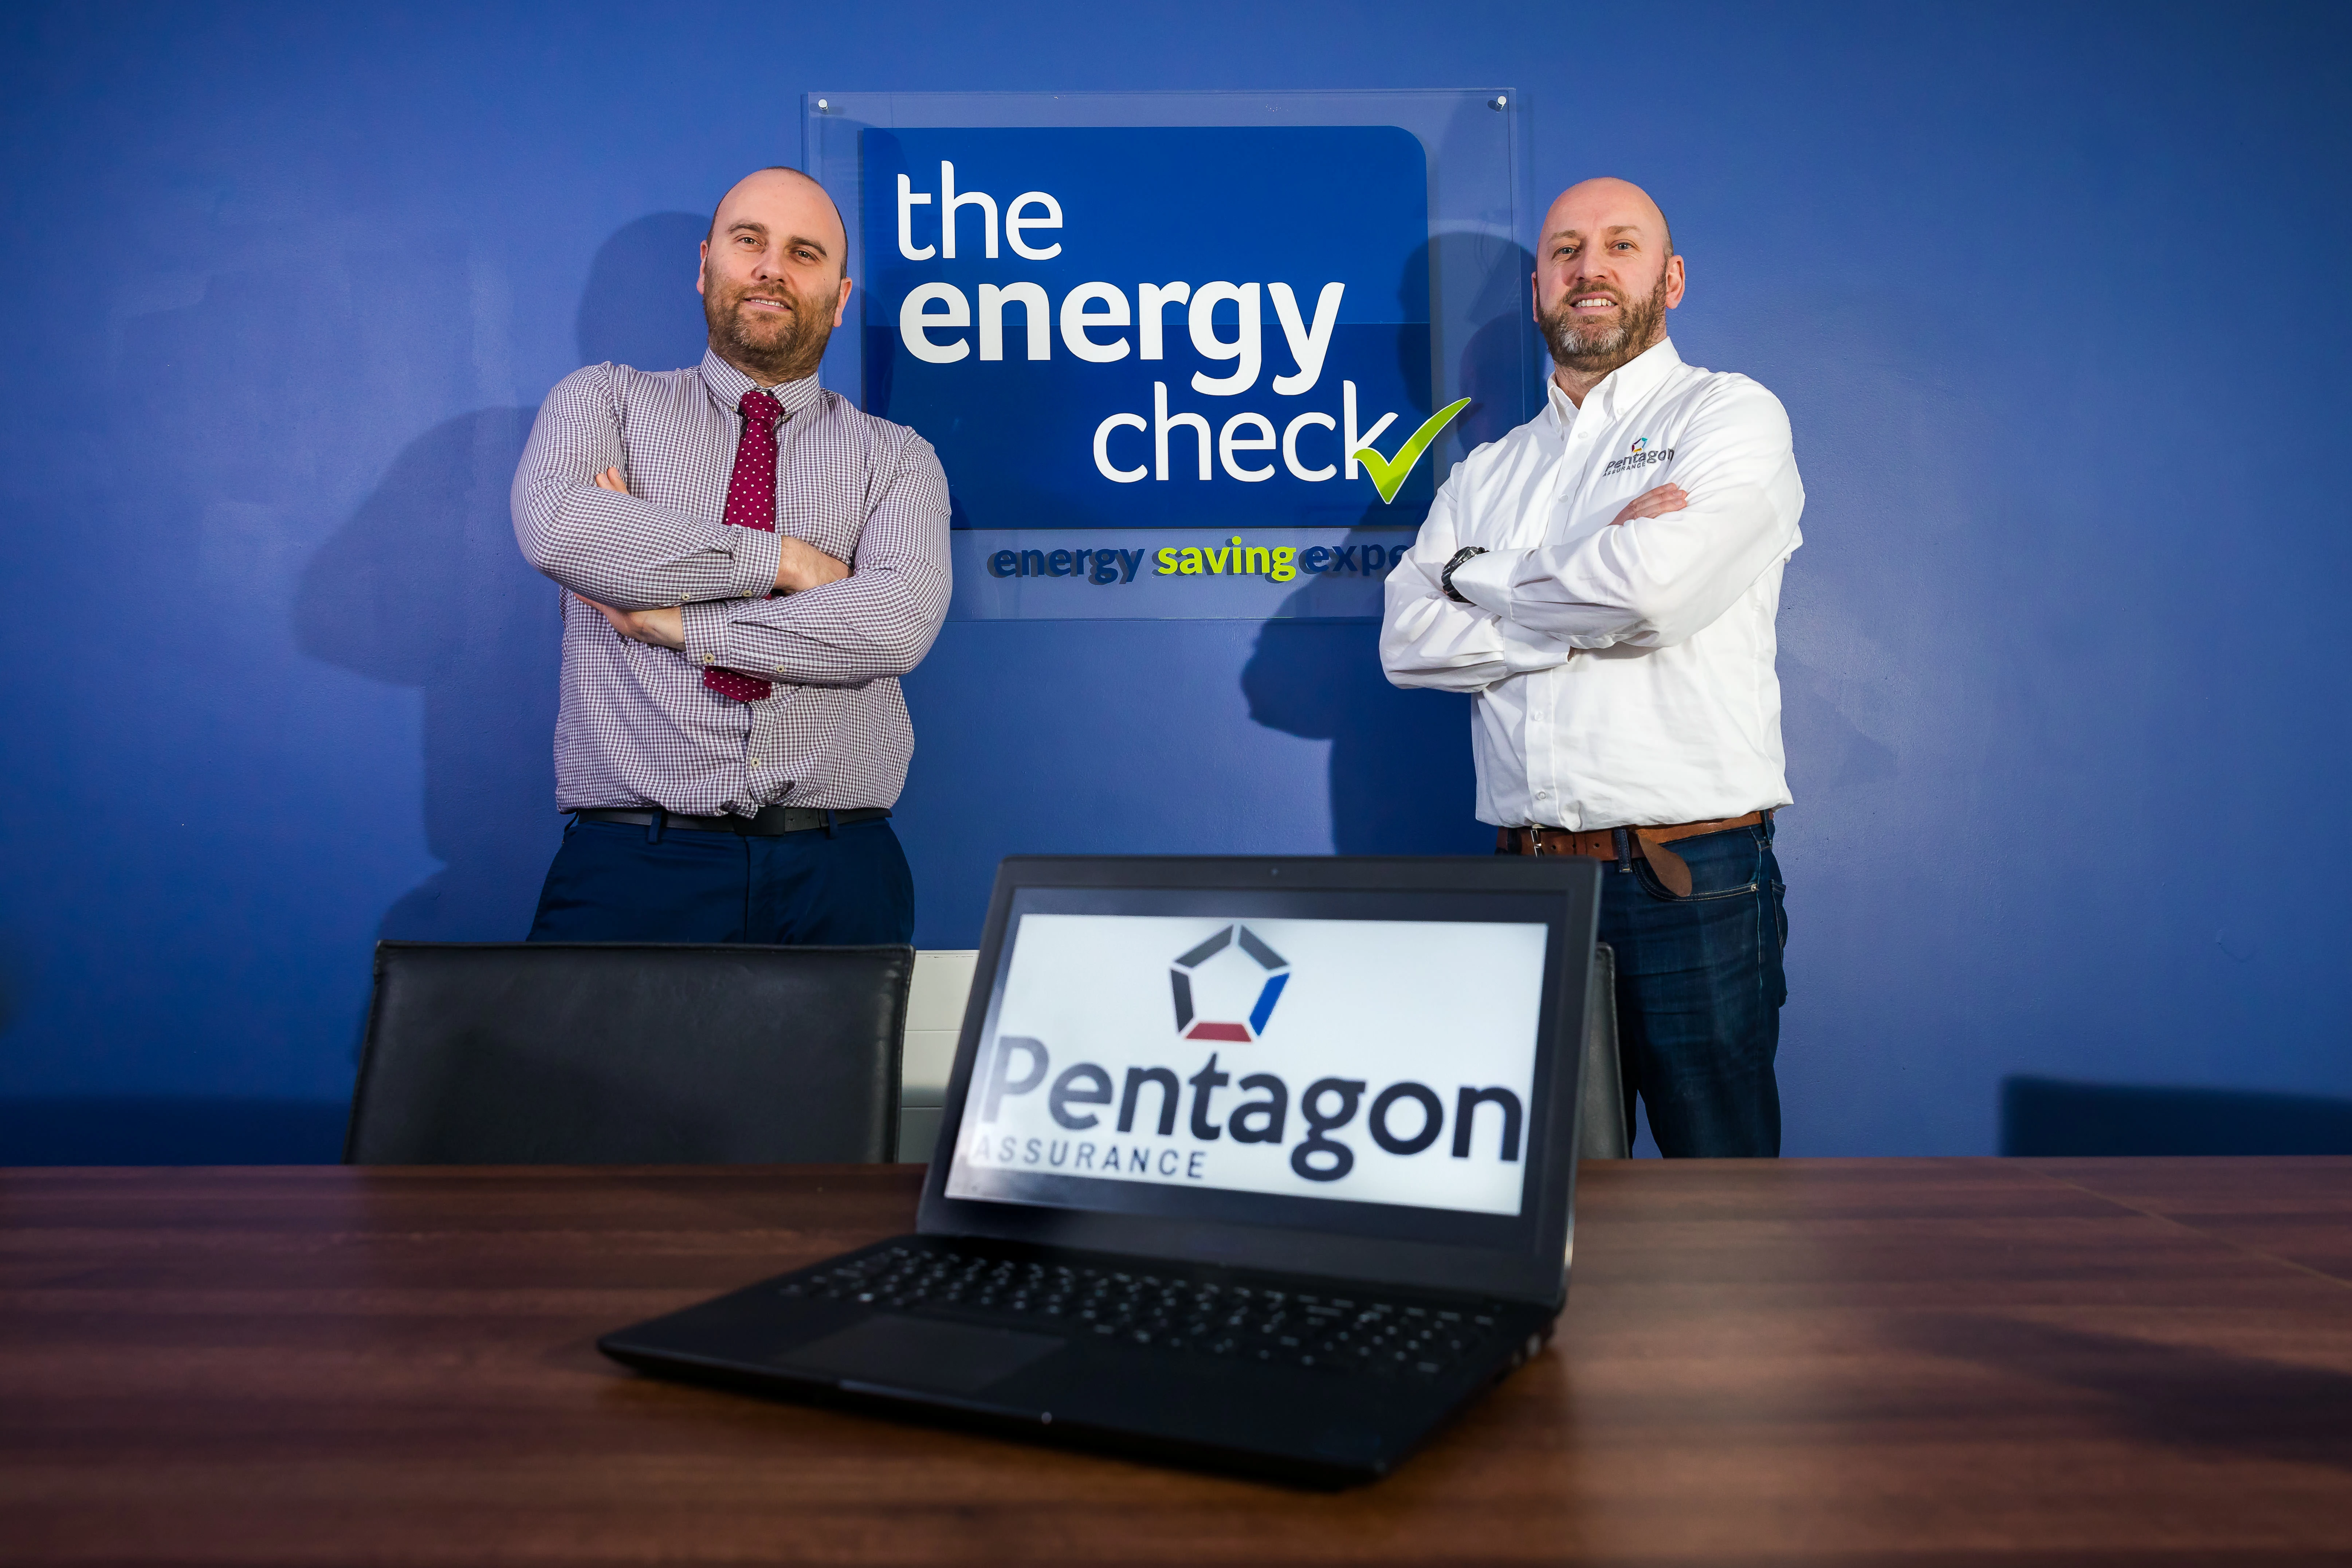 Pentagon Assurance has partnered up with The Energy Check as part of their expansion